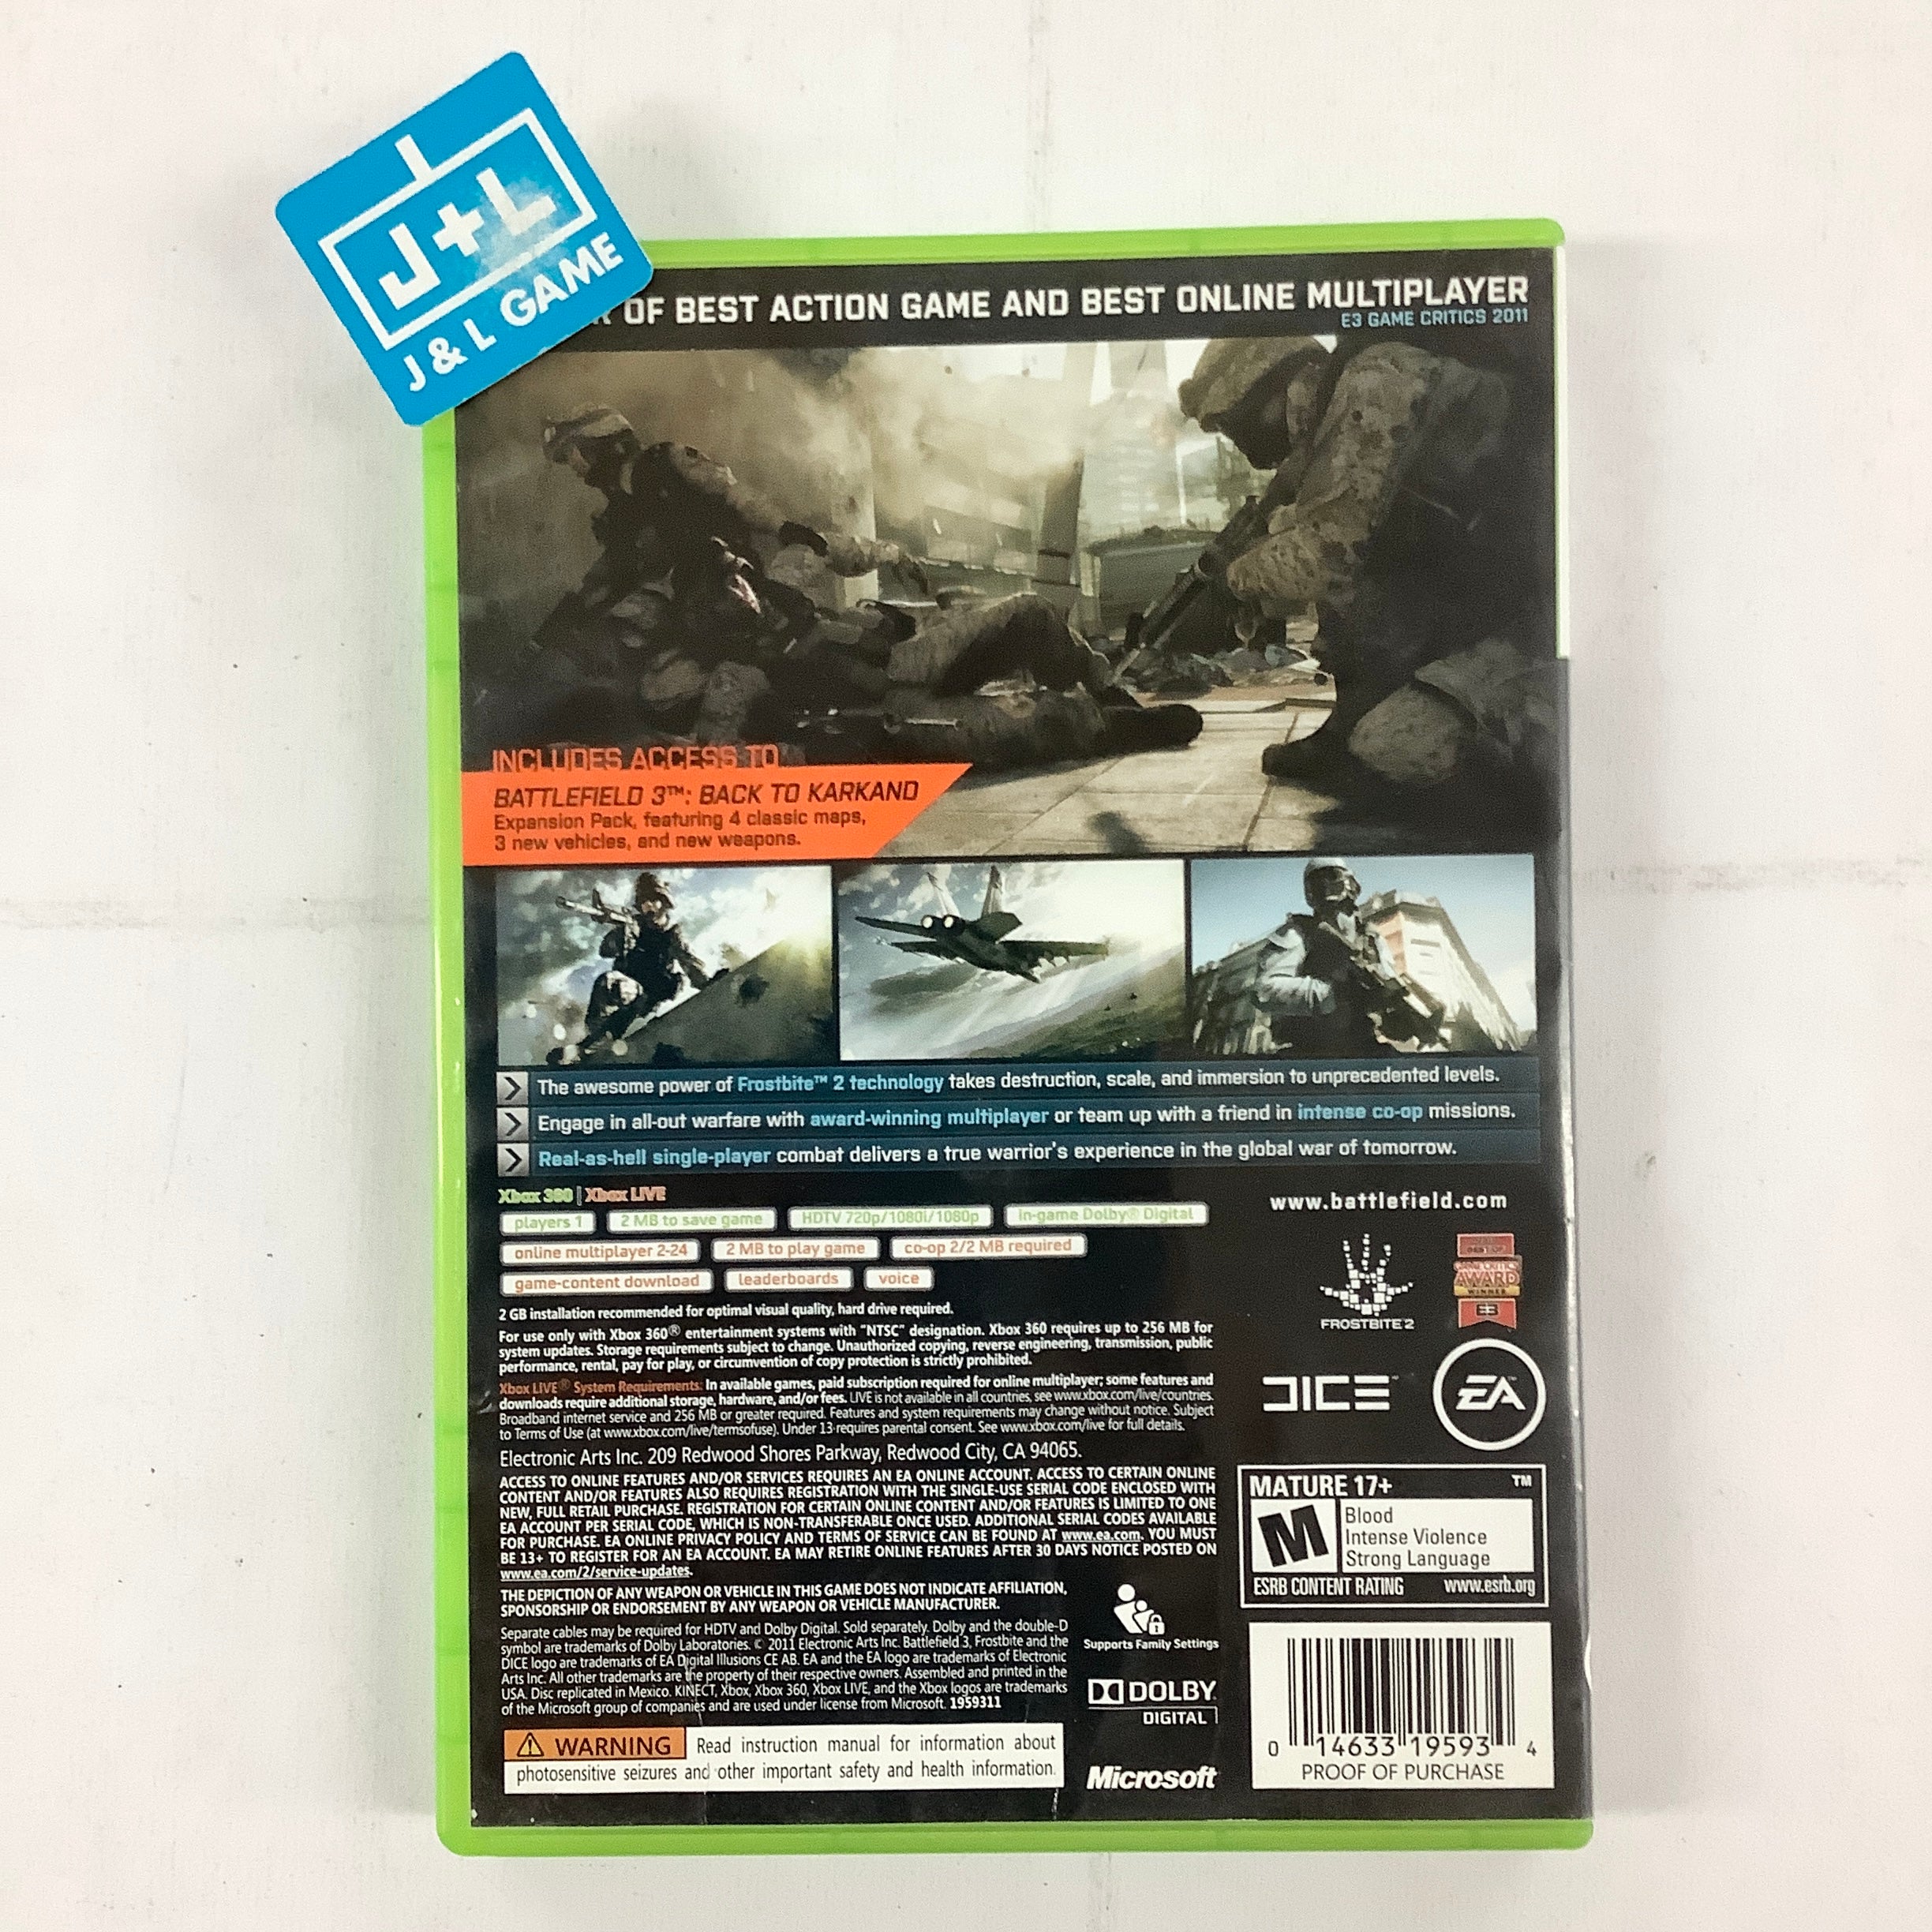 Battlefield 3 (Limited Edition) - Xbox 360 [Pre-Owned] Video Games Electronic Arts   